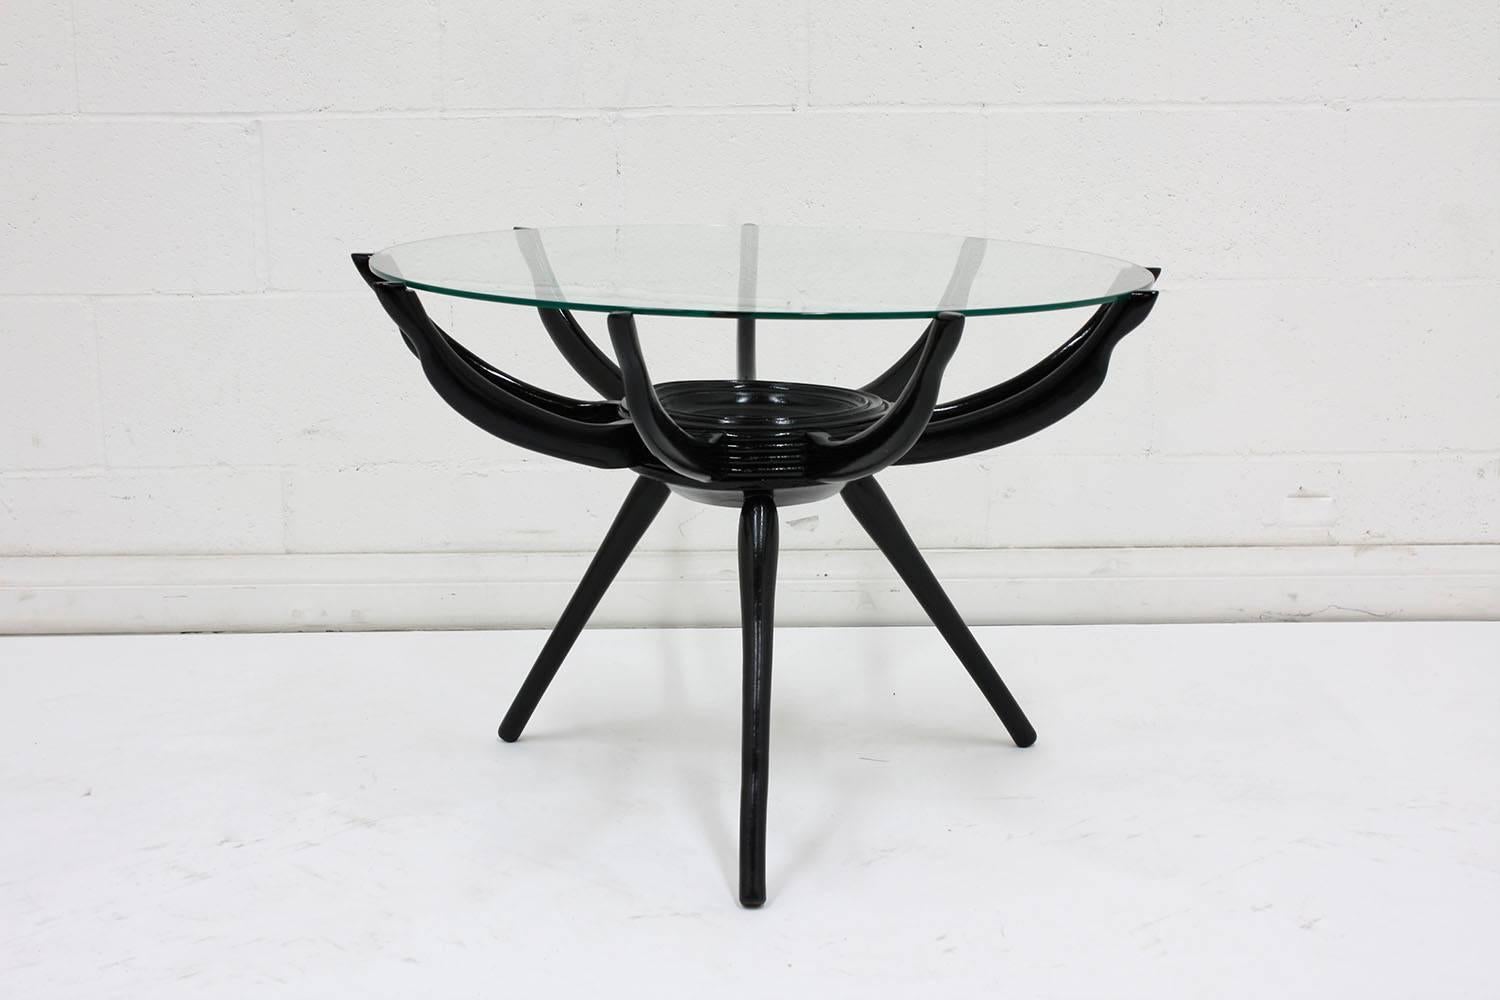 This 1960s Mid-Century Modern style coffee table features a wood base and a glass top. The pedestal wood base has an ebonized and lacquered finish. The base has a circular centre with nine arms curving from there to hold up the glass top and three